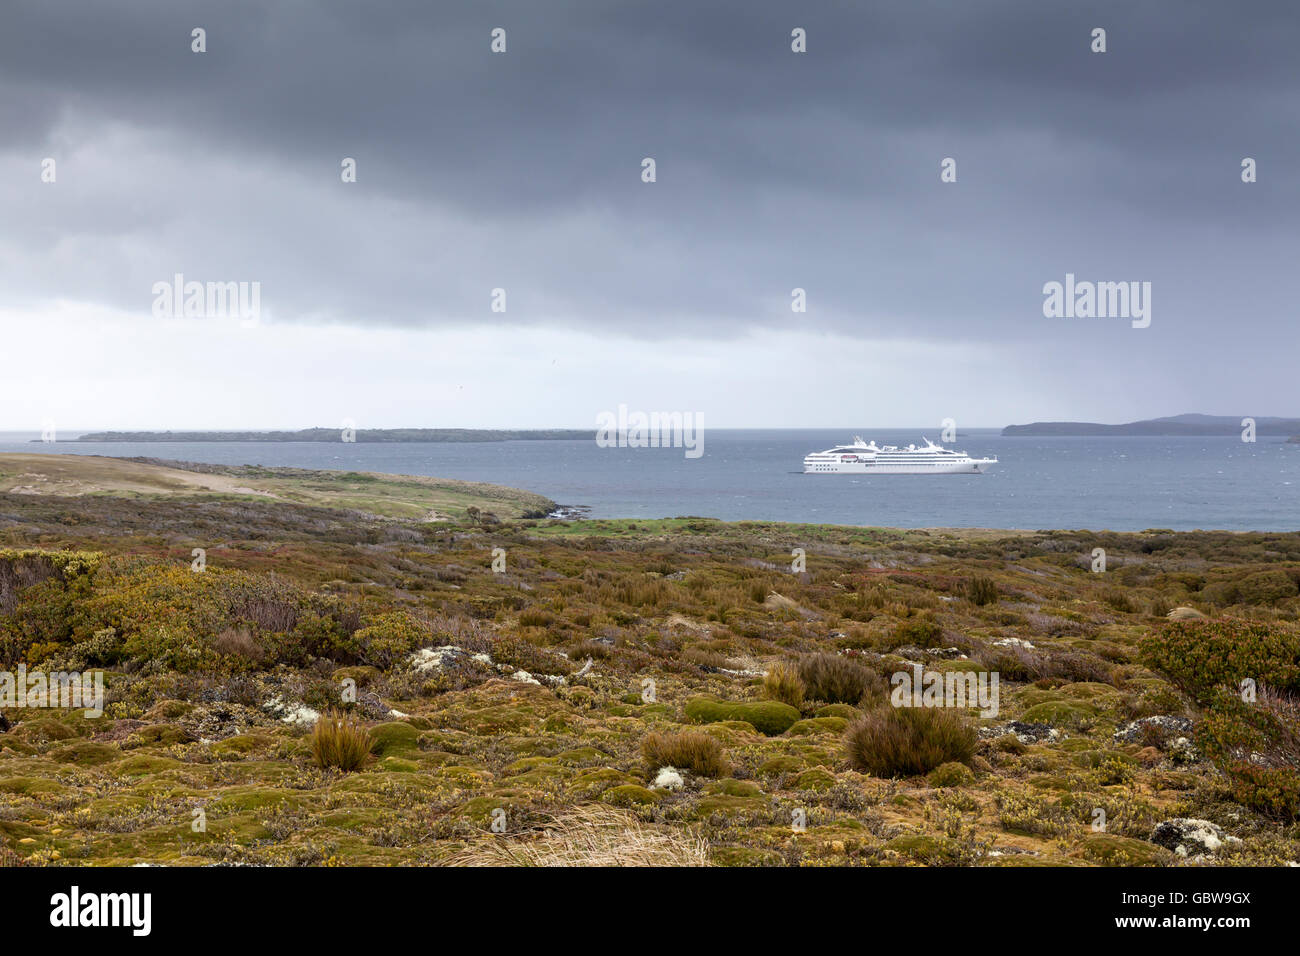 Field of megaherbs with French expedition ship Le Soleal in the background, Enderby Island, Auckland Islands, New Zealand Stock Photo